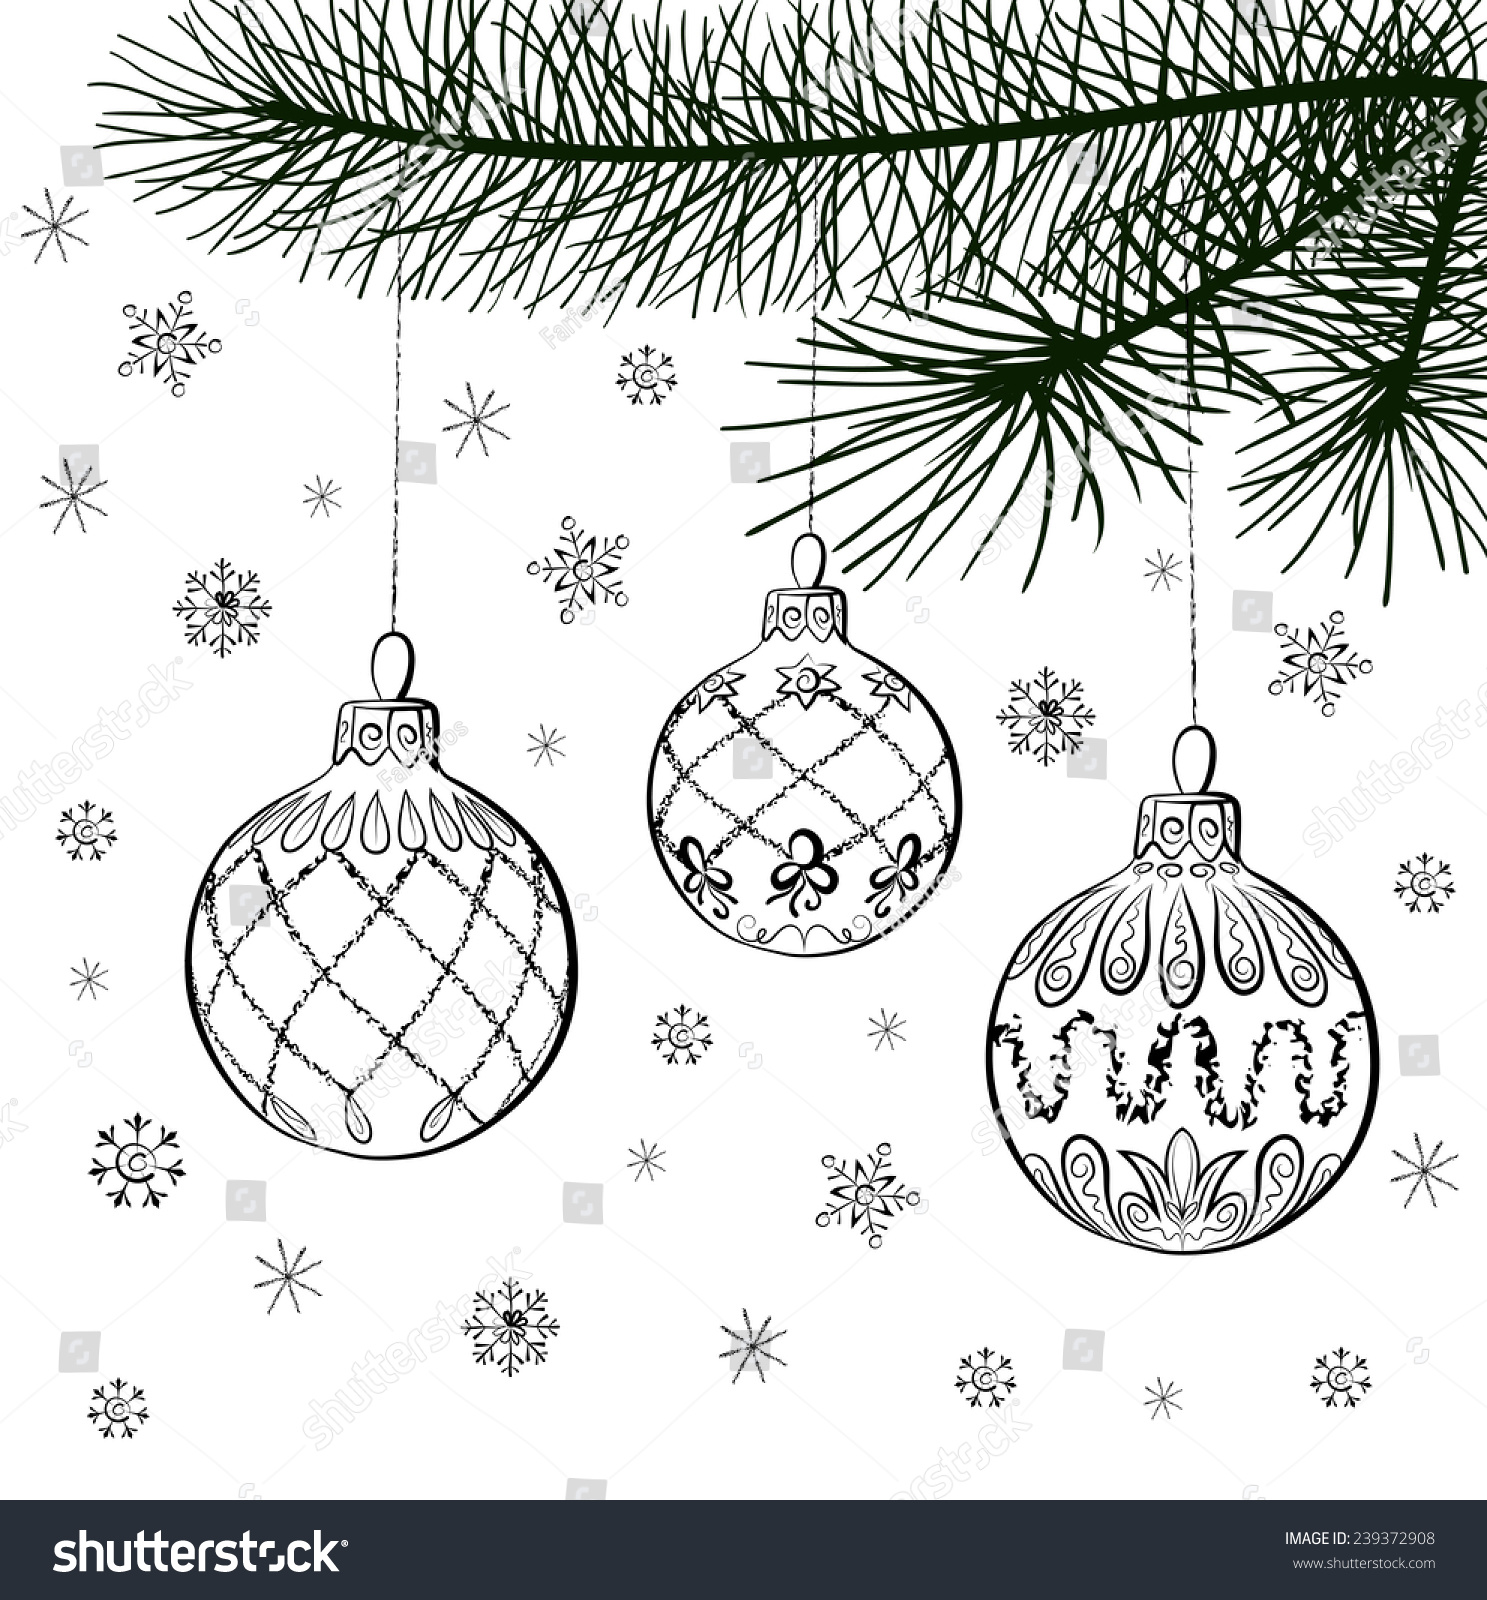 Vector Sketch Of Three Christmas Balls On Coniferous Branch. Hand Draw ...